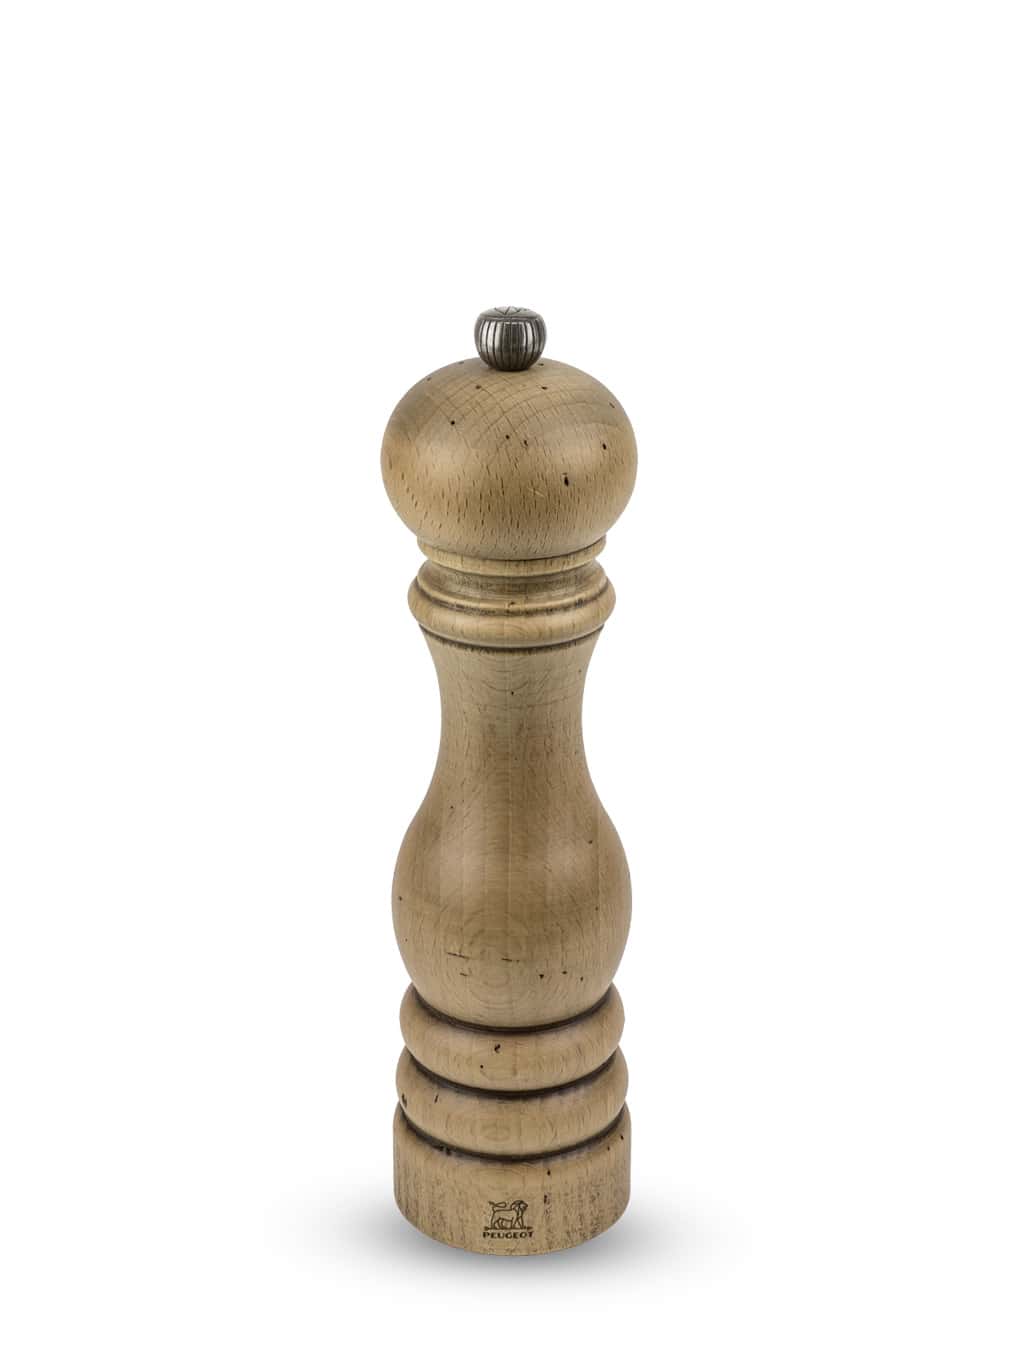 Image of Manual Beech Wood Pepper Mill with Antique Finish, 22cm Paris Antique